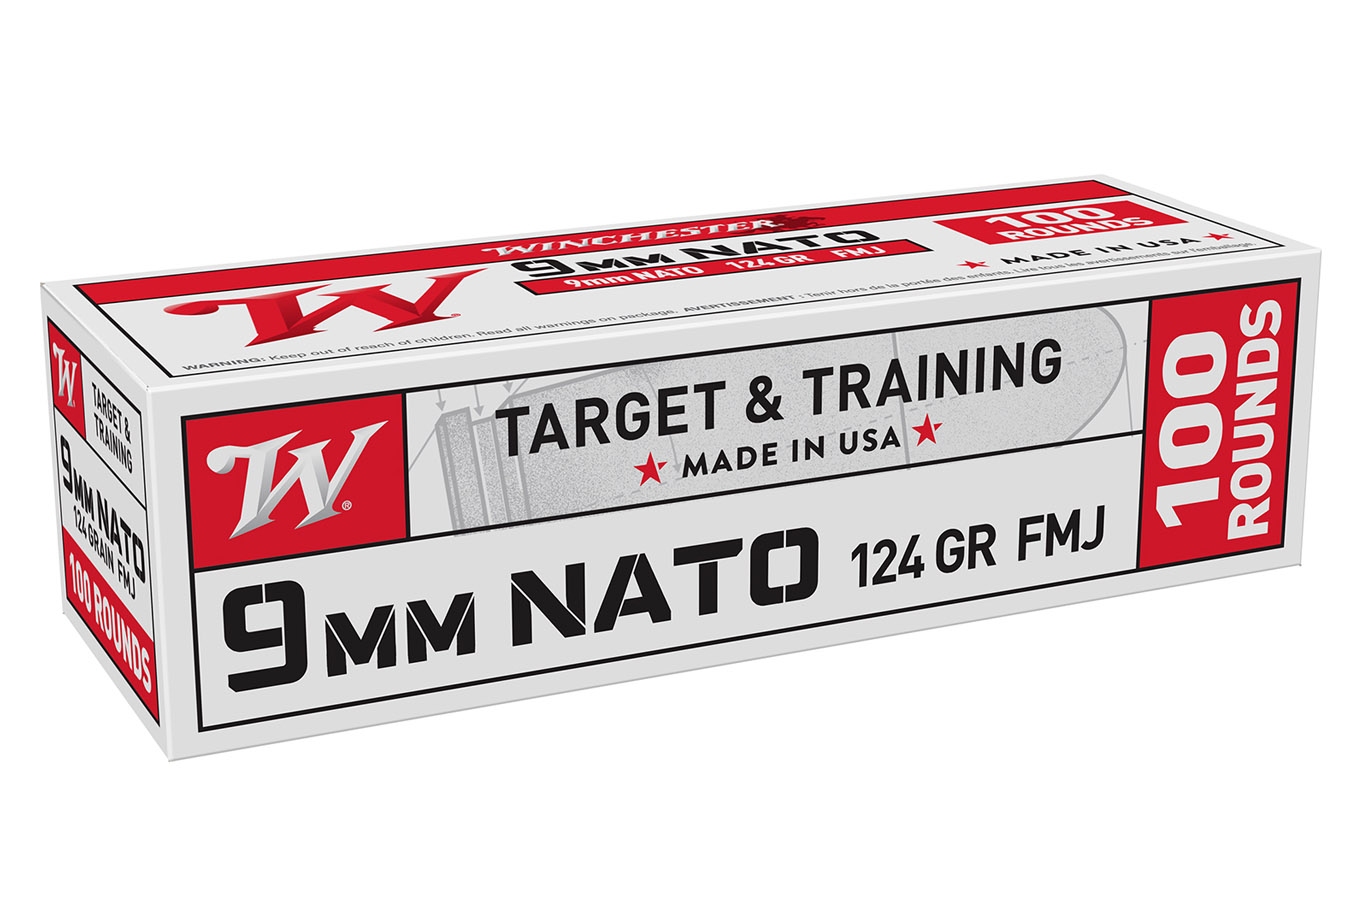 WINCHESTER AMMO 9mm NATO 124 gr FMJ Target and Training 100/Box